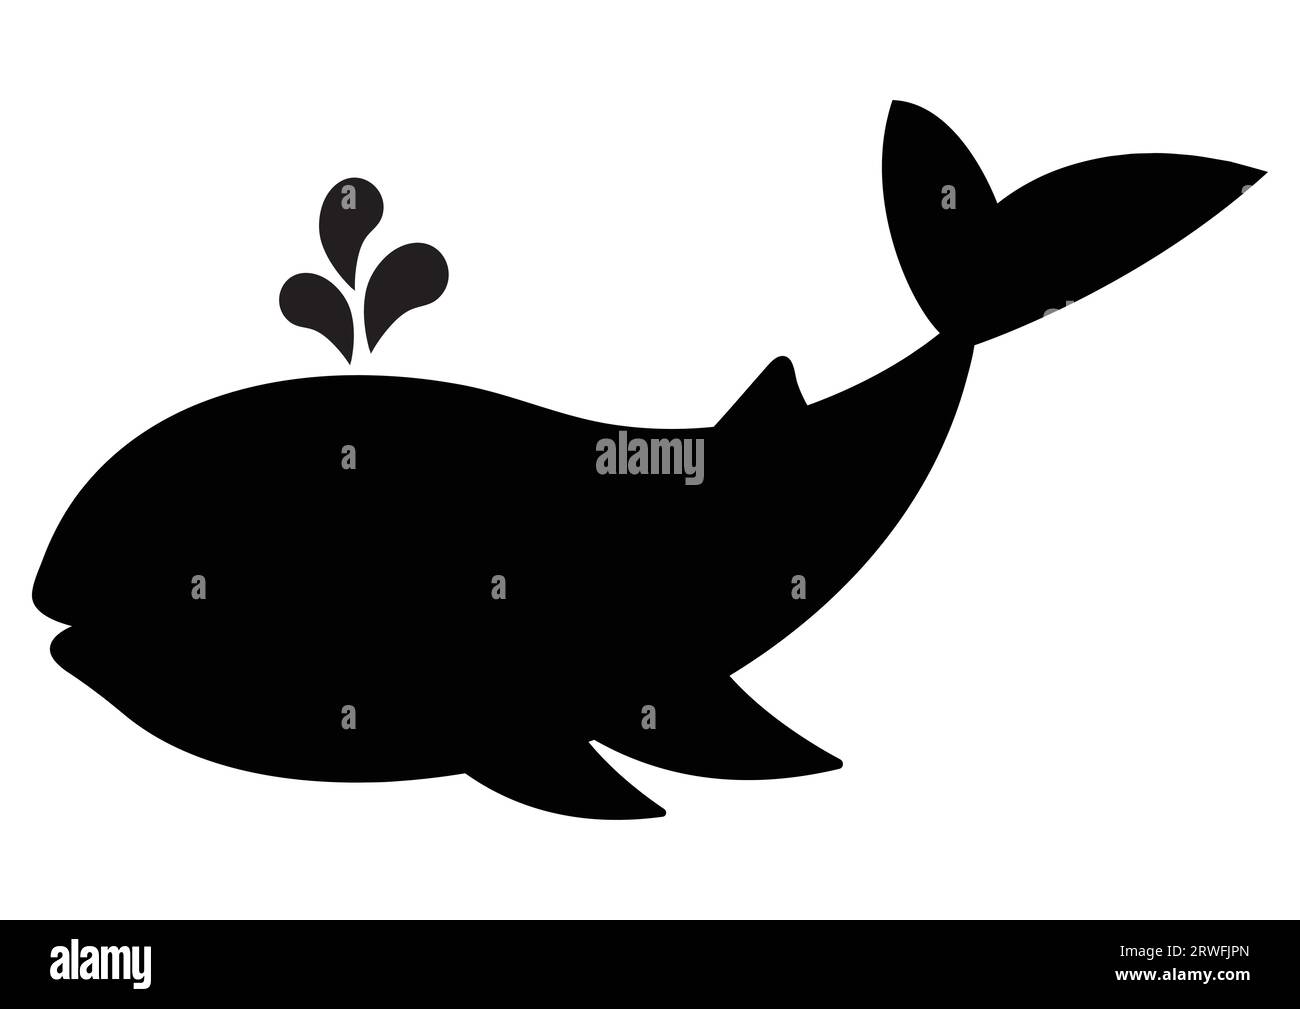 Whale silhouette clipart vector flat design Stock Vector